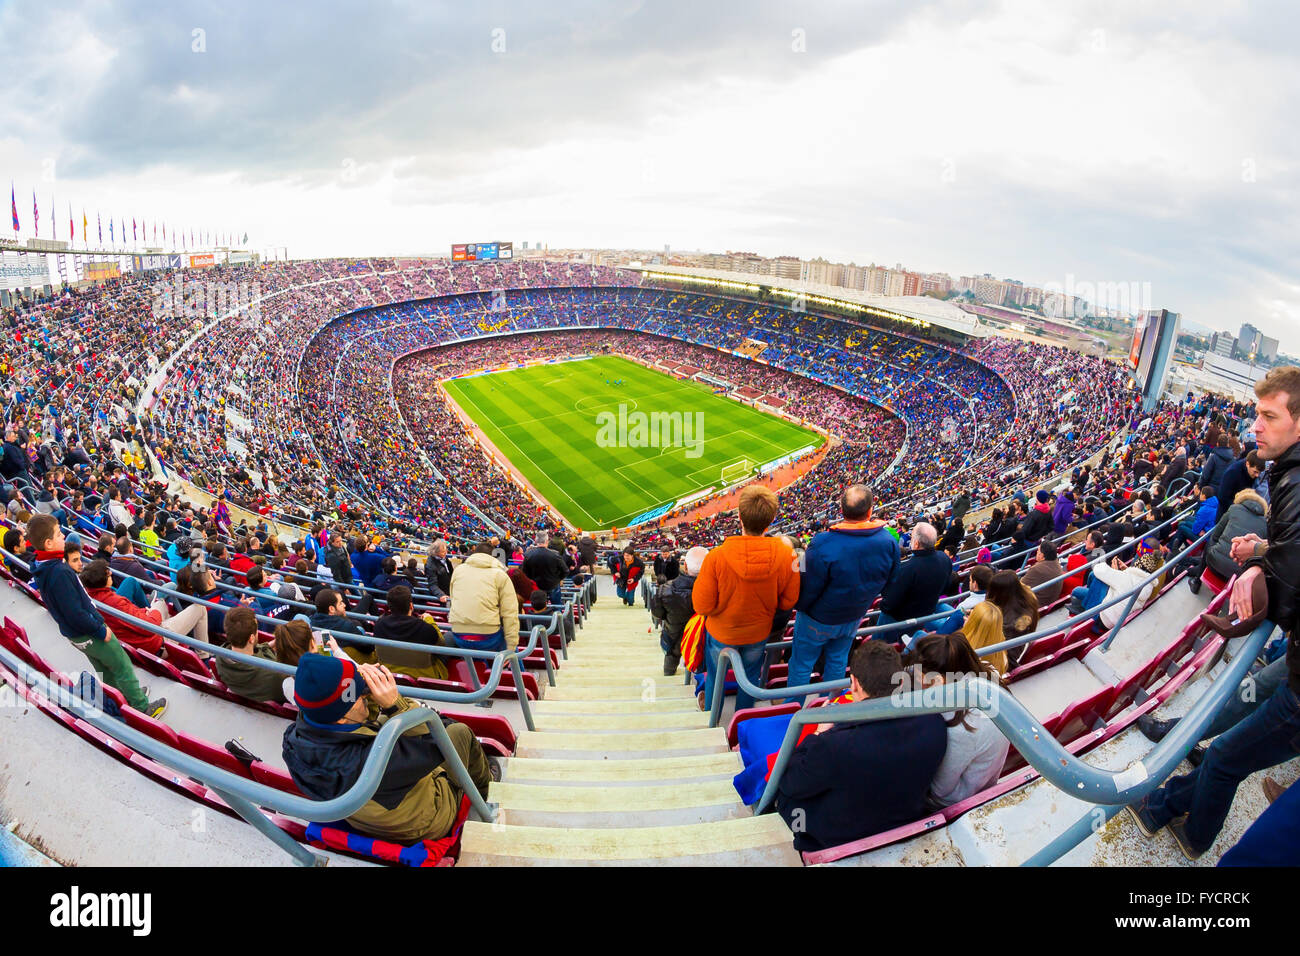 BARCELONA - FEB 21: A general view of the Camp Nou Stadium in the football match between Futbol Club Barcelona and Malaga of the Stock Photo